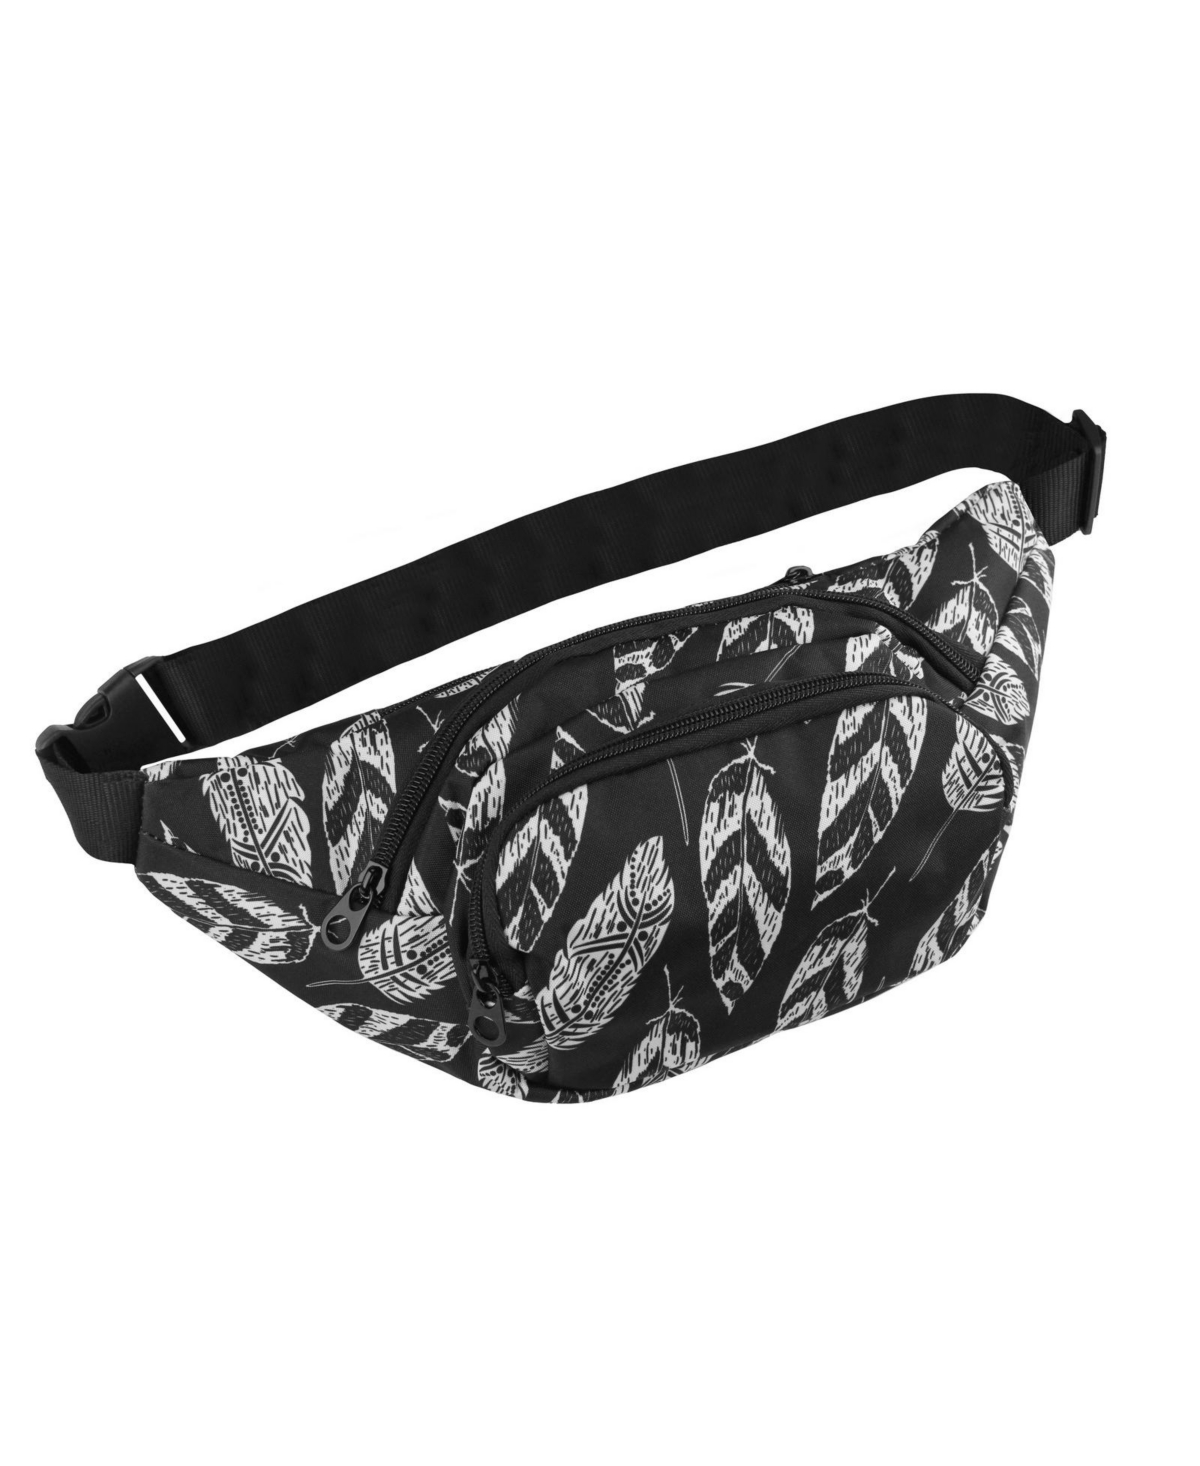 Feathers 14-Inch Fanny Pack Adjustable Crossbody Waist Pack - Feather